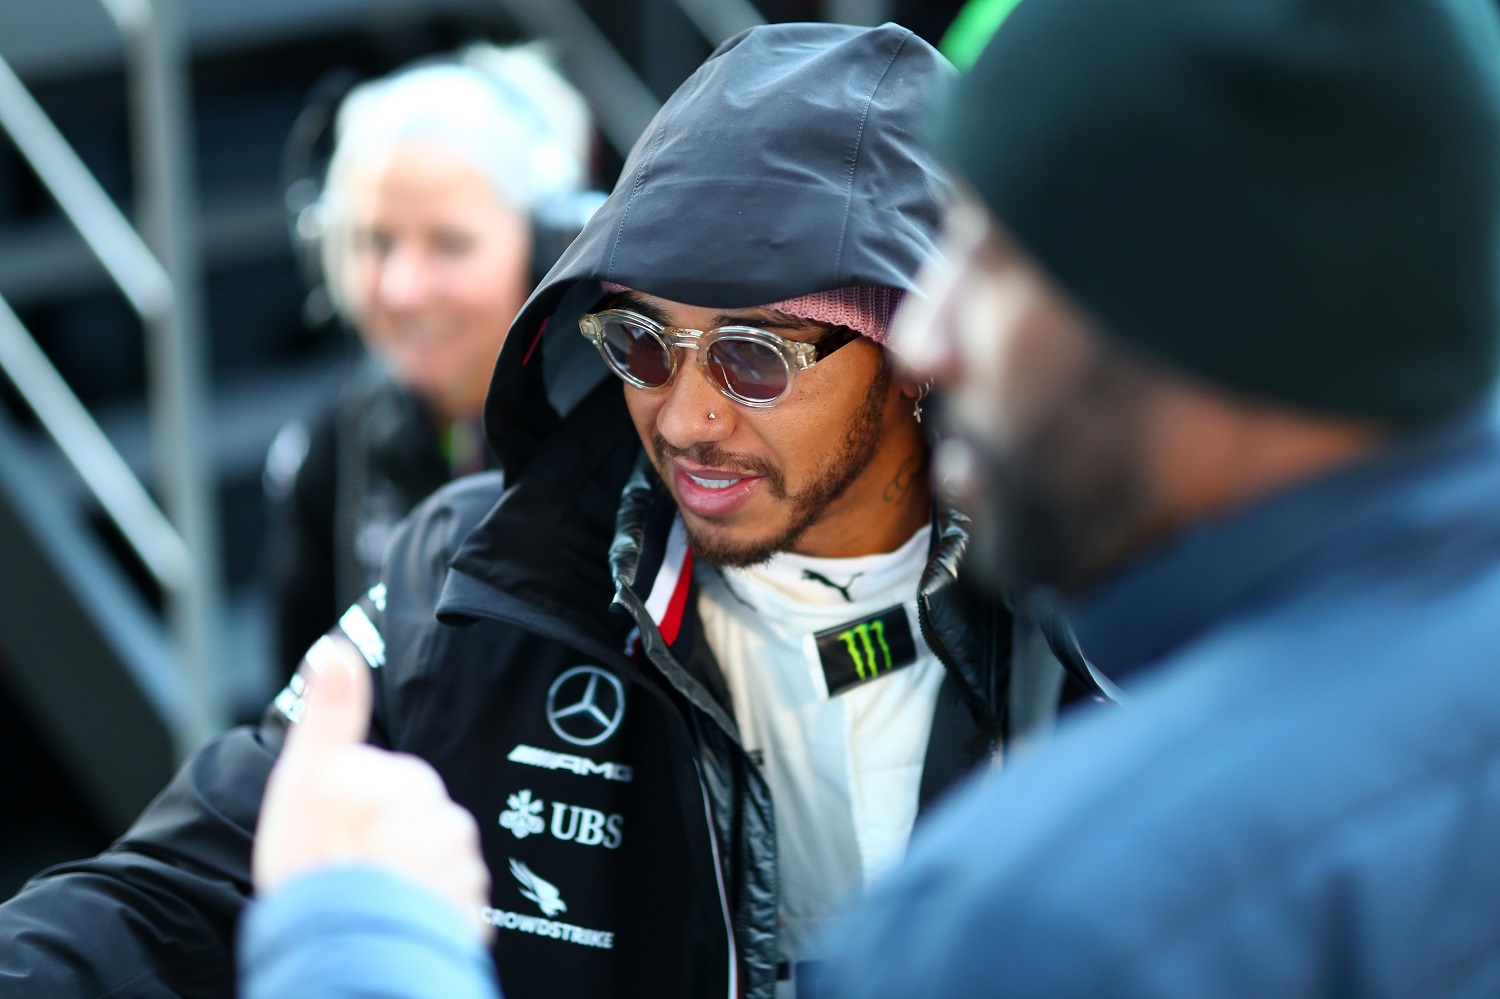 Lewis Hamilton's quest for a seventh Formula One driving championship begins this weekend. | Marco Canoniero/LightRocket via Getty Images